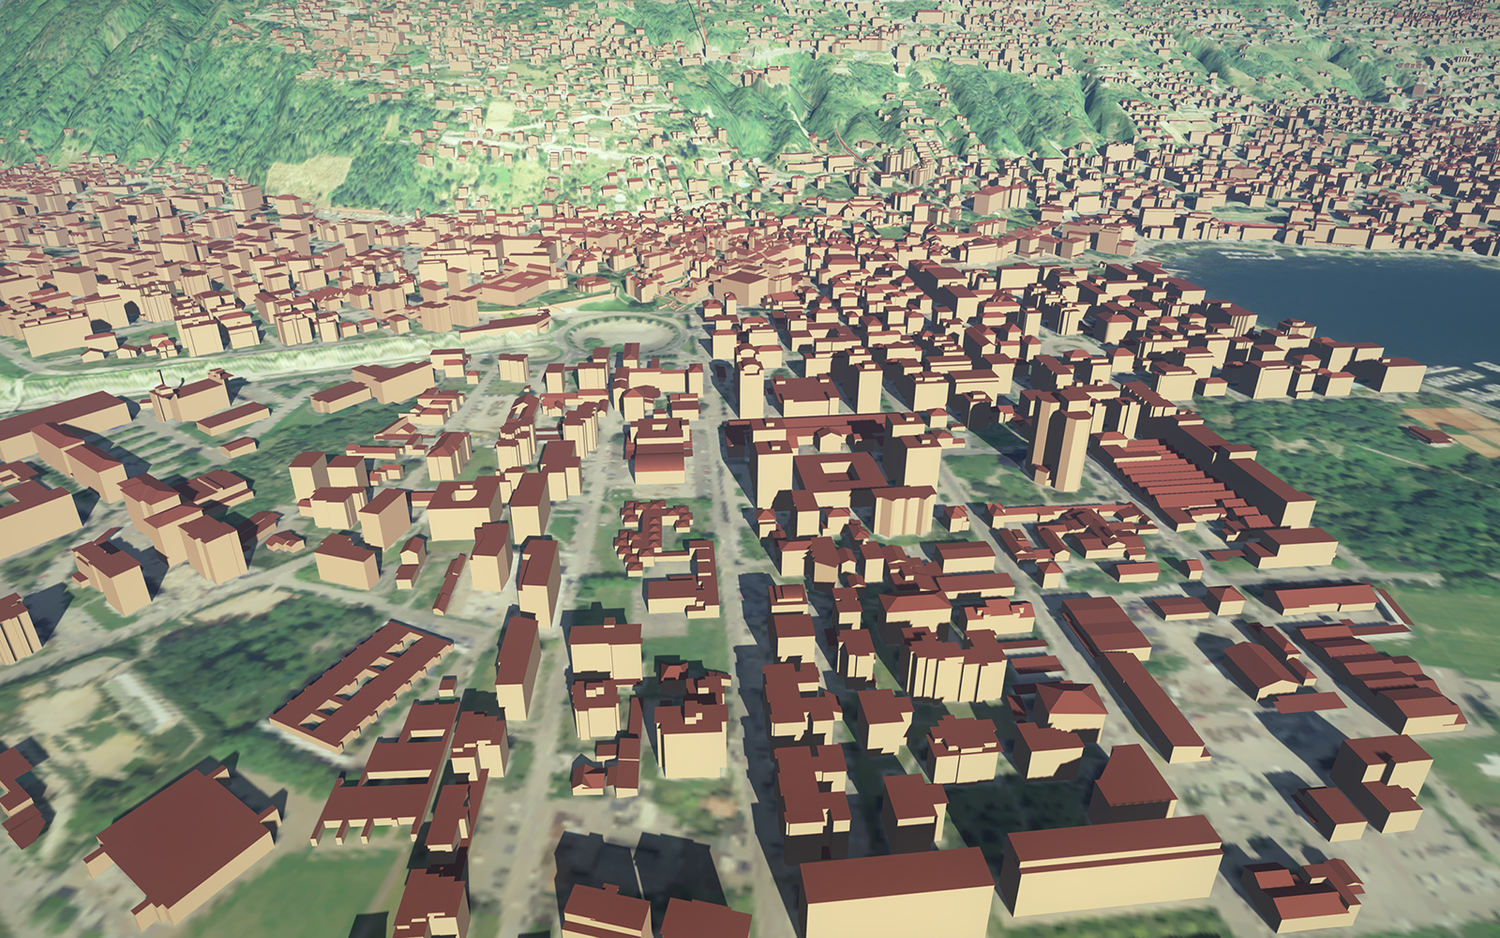 The image shows 3D building models of Locarno integrated into a 3D model that is textured with an aerial image.